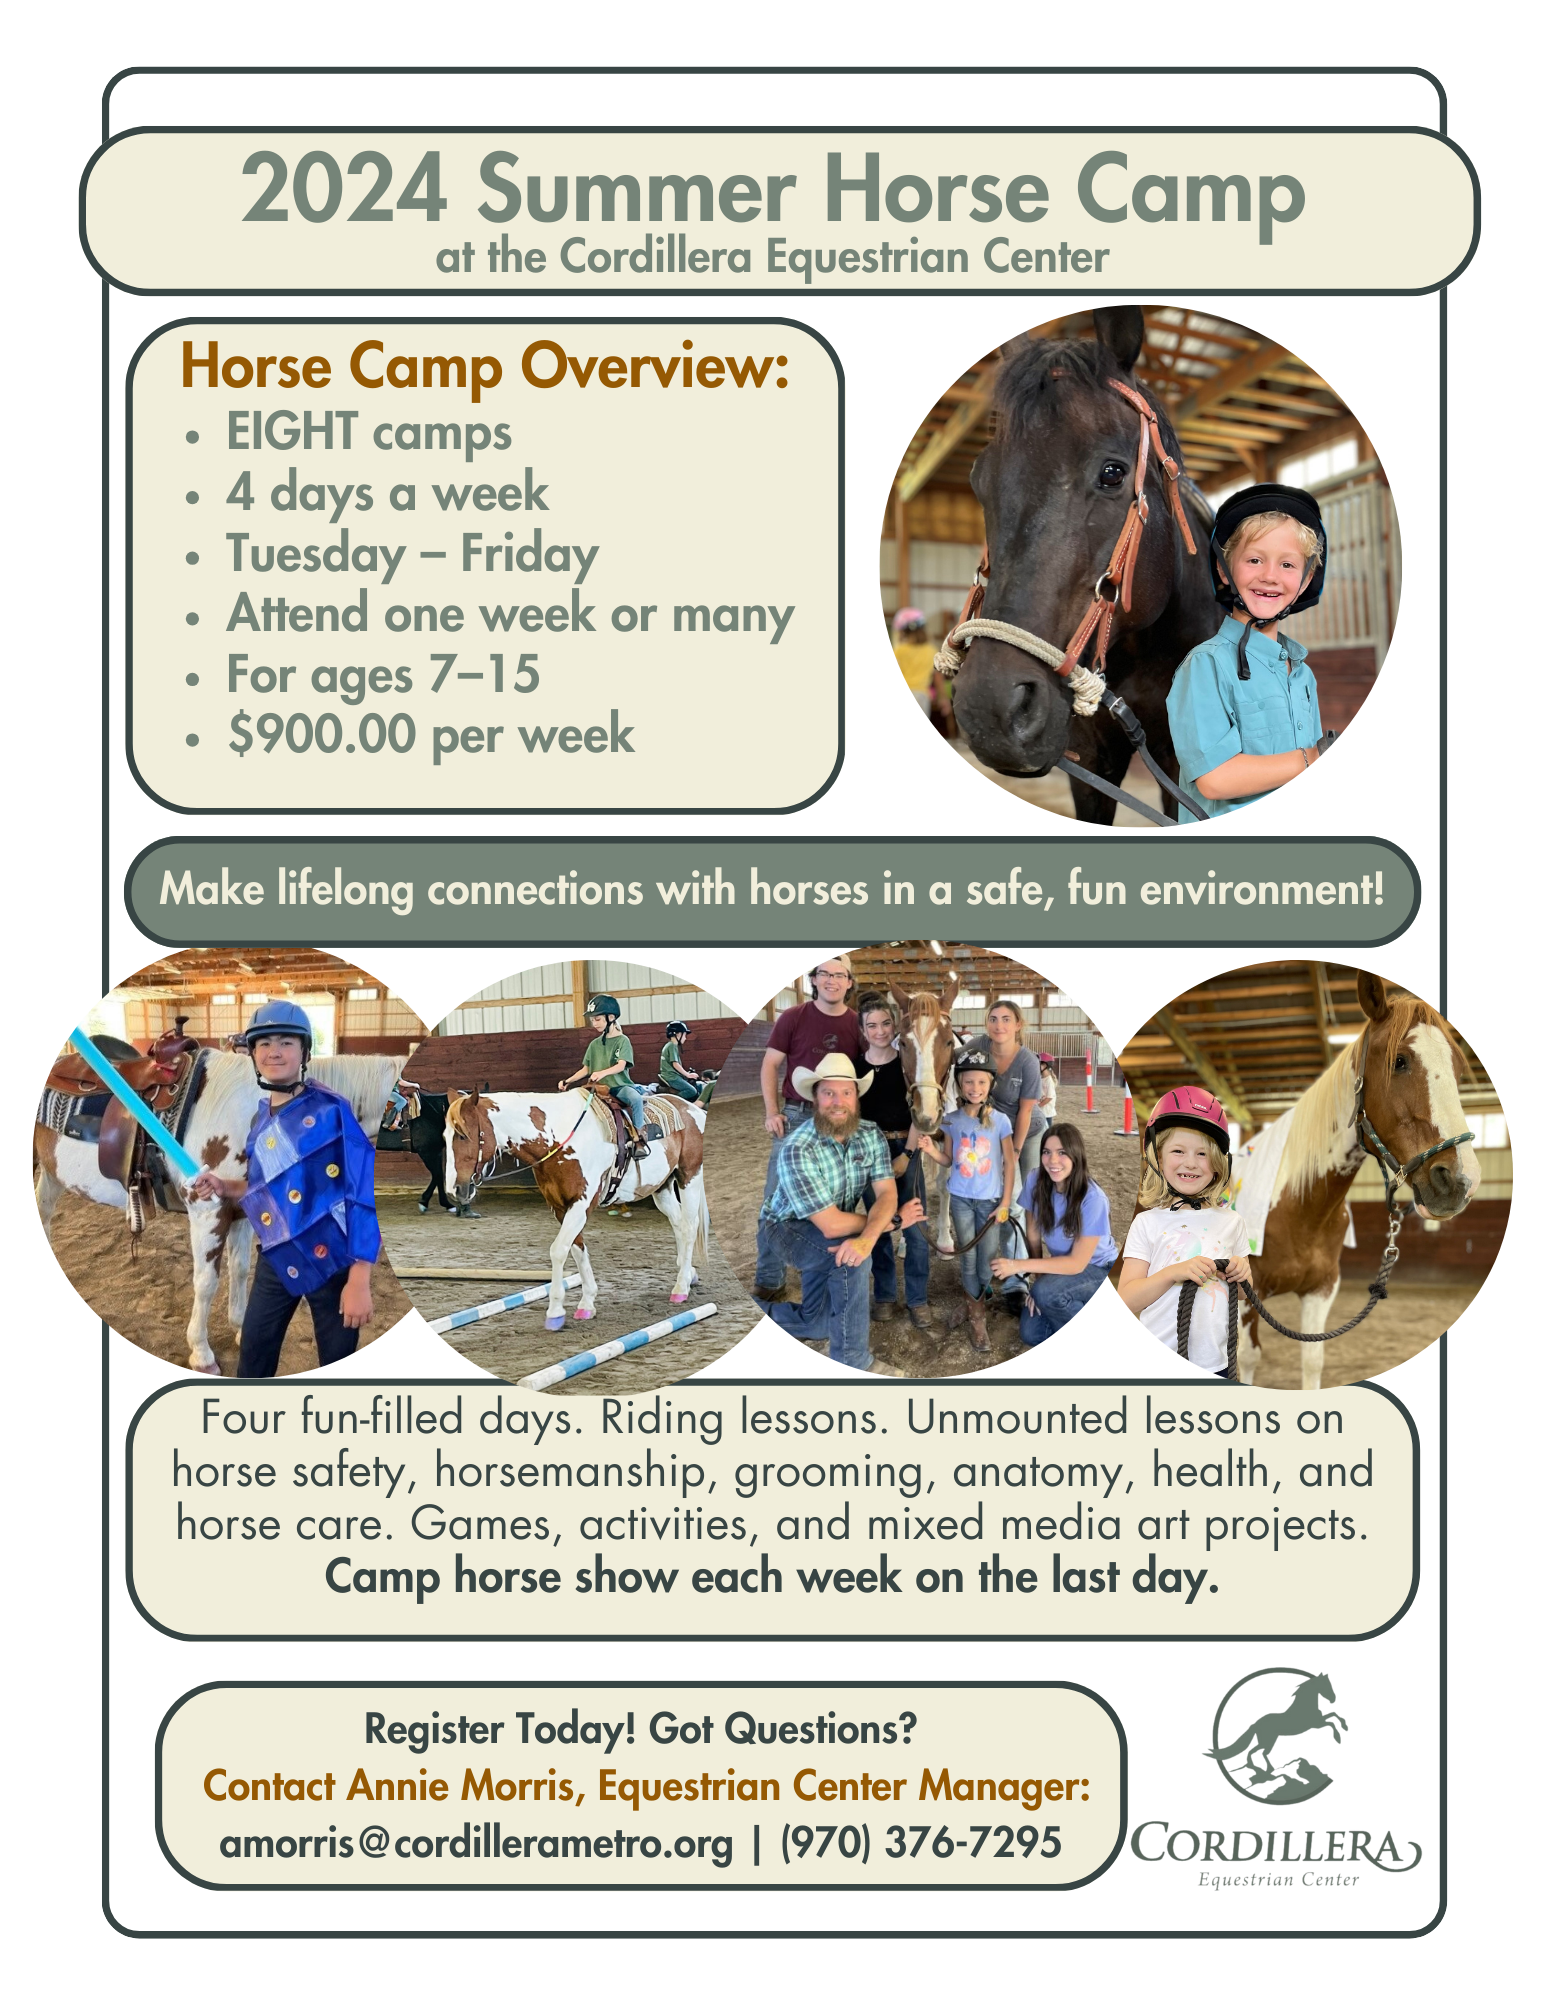 This flyer includes details about Cordillera's Summer 2024 Horse Camps.